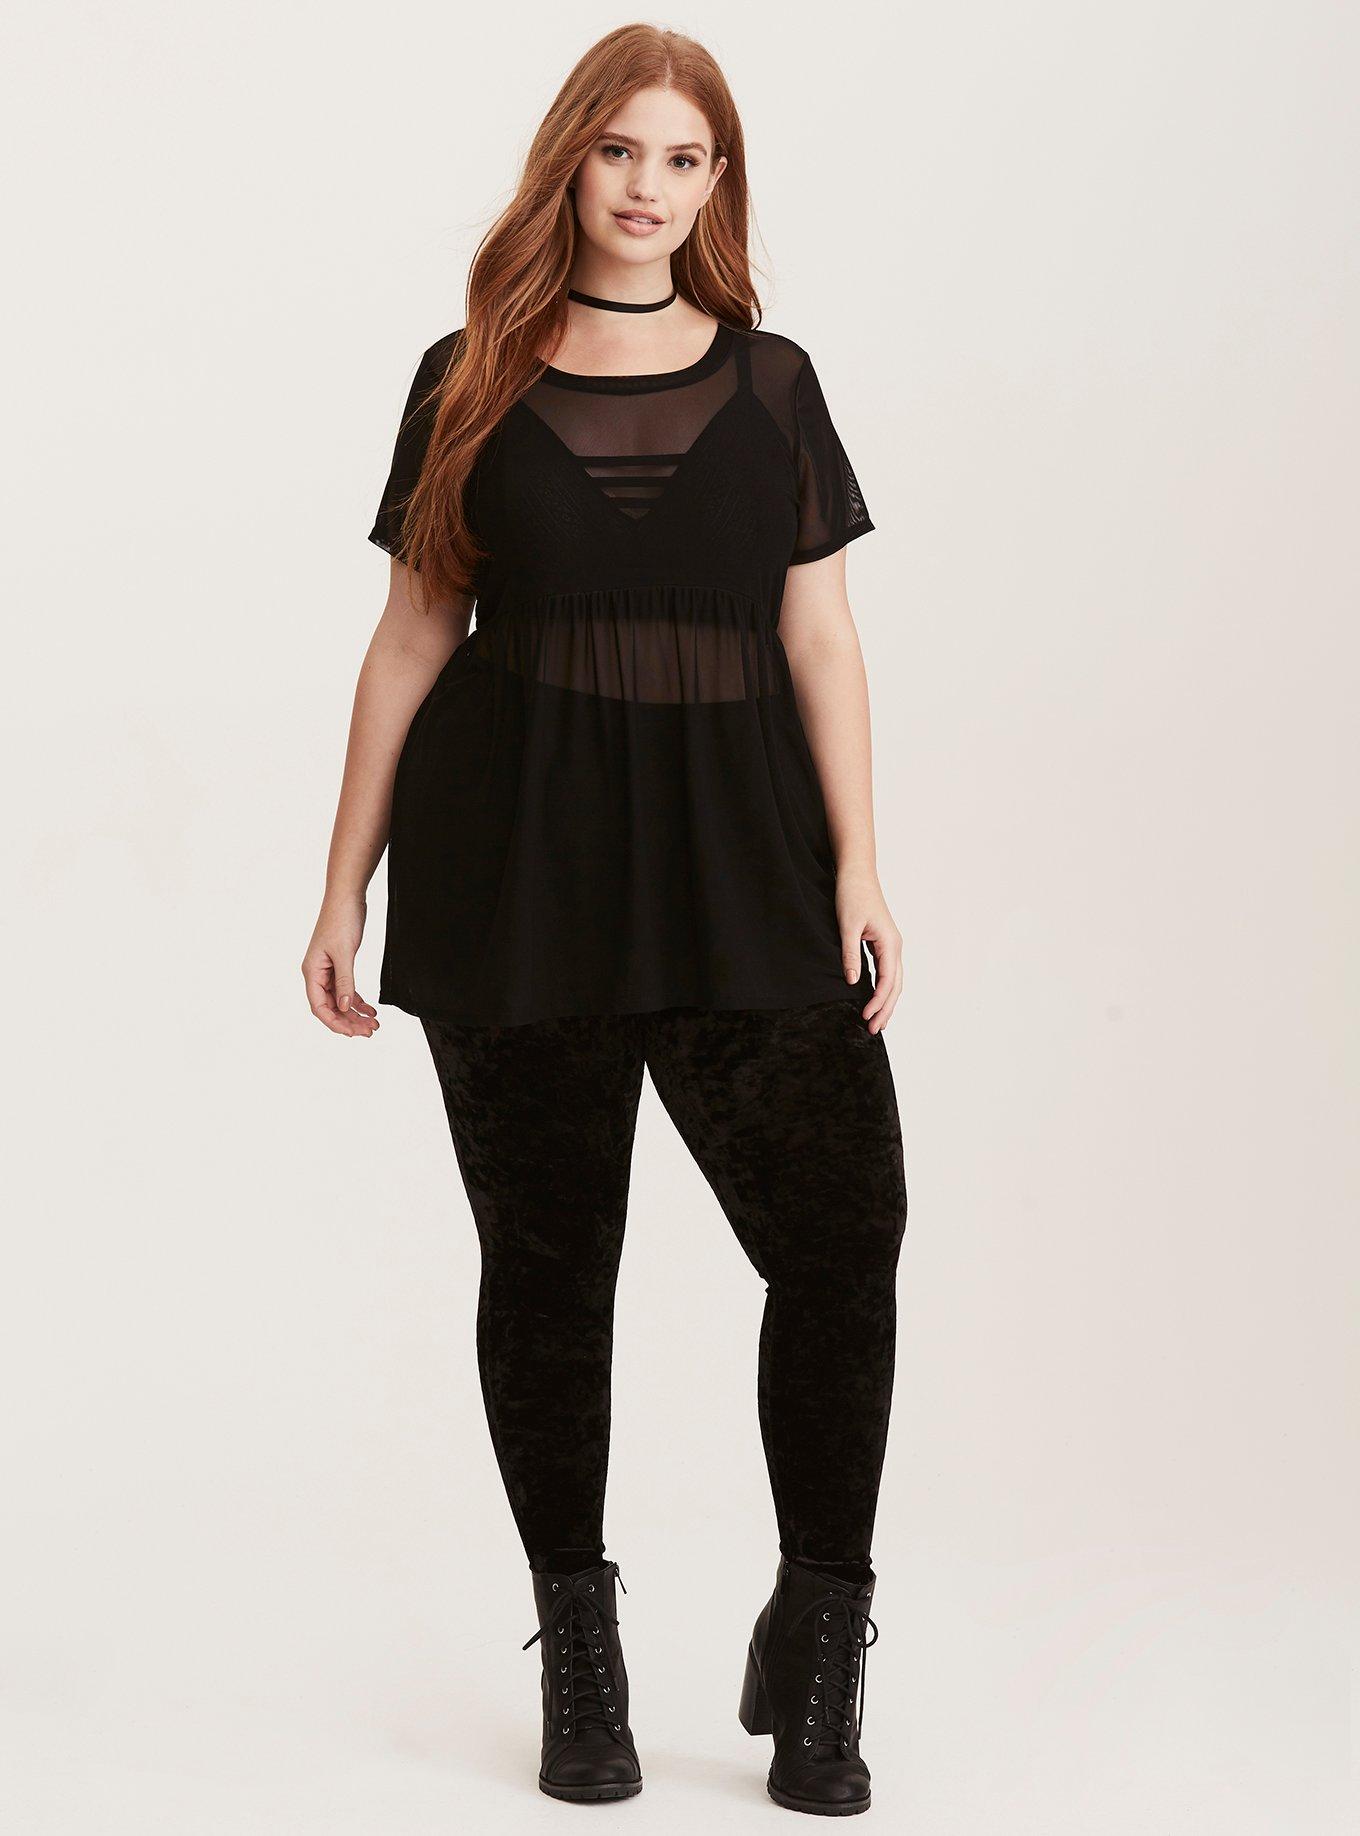 Plus size thermal tights 600den curvy in black, 4.99€